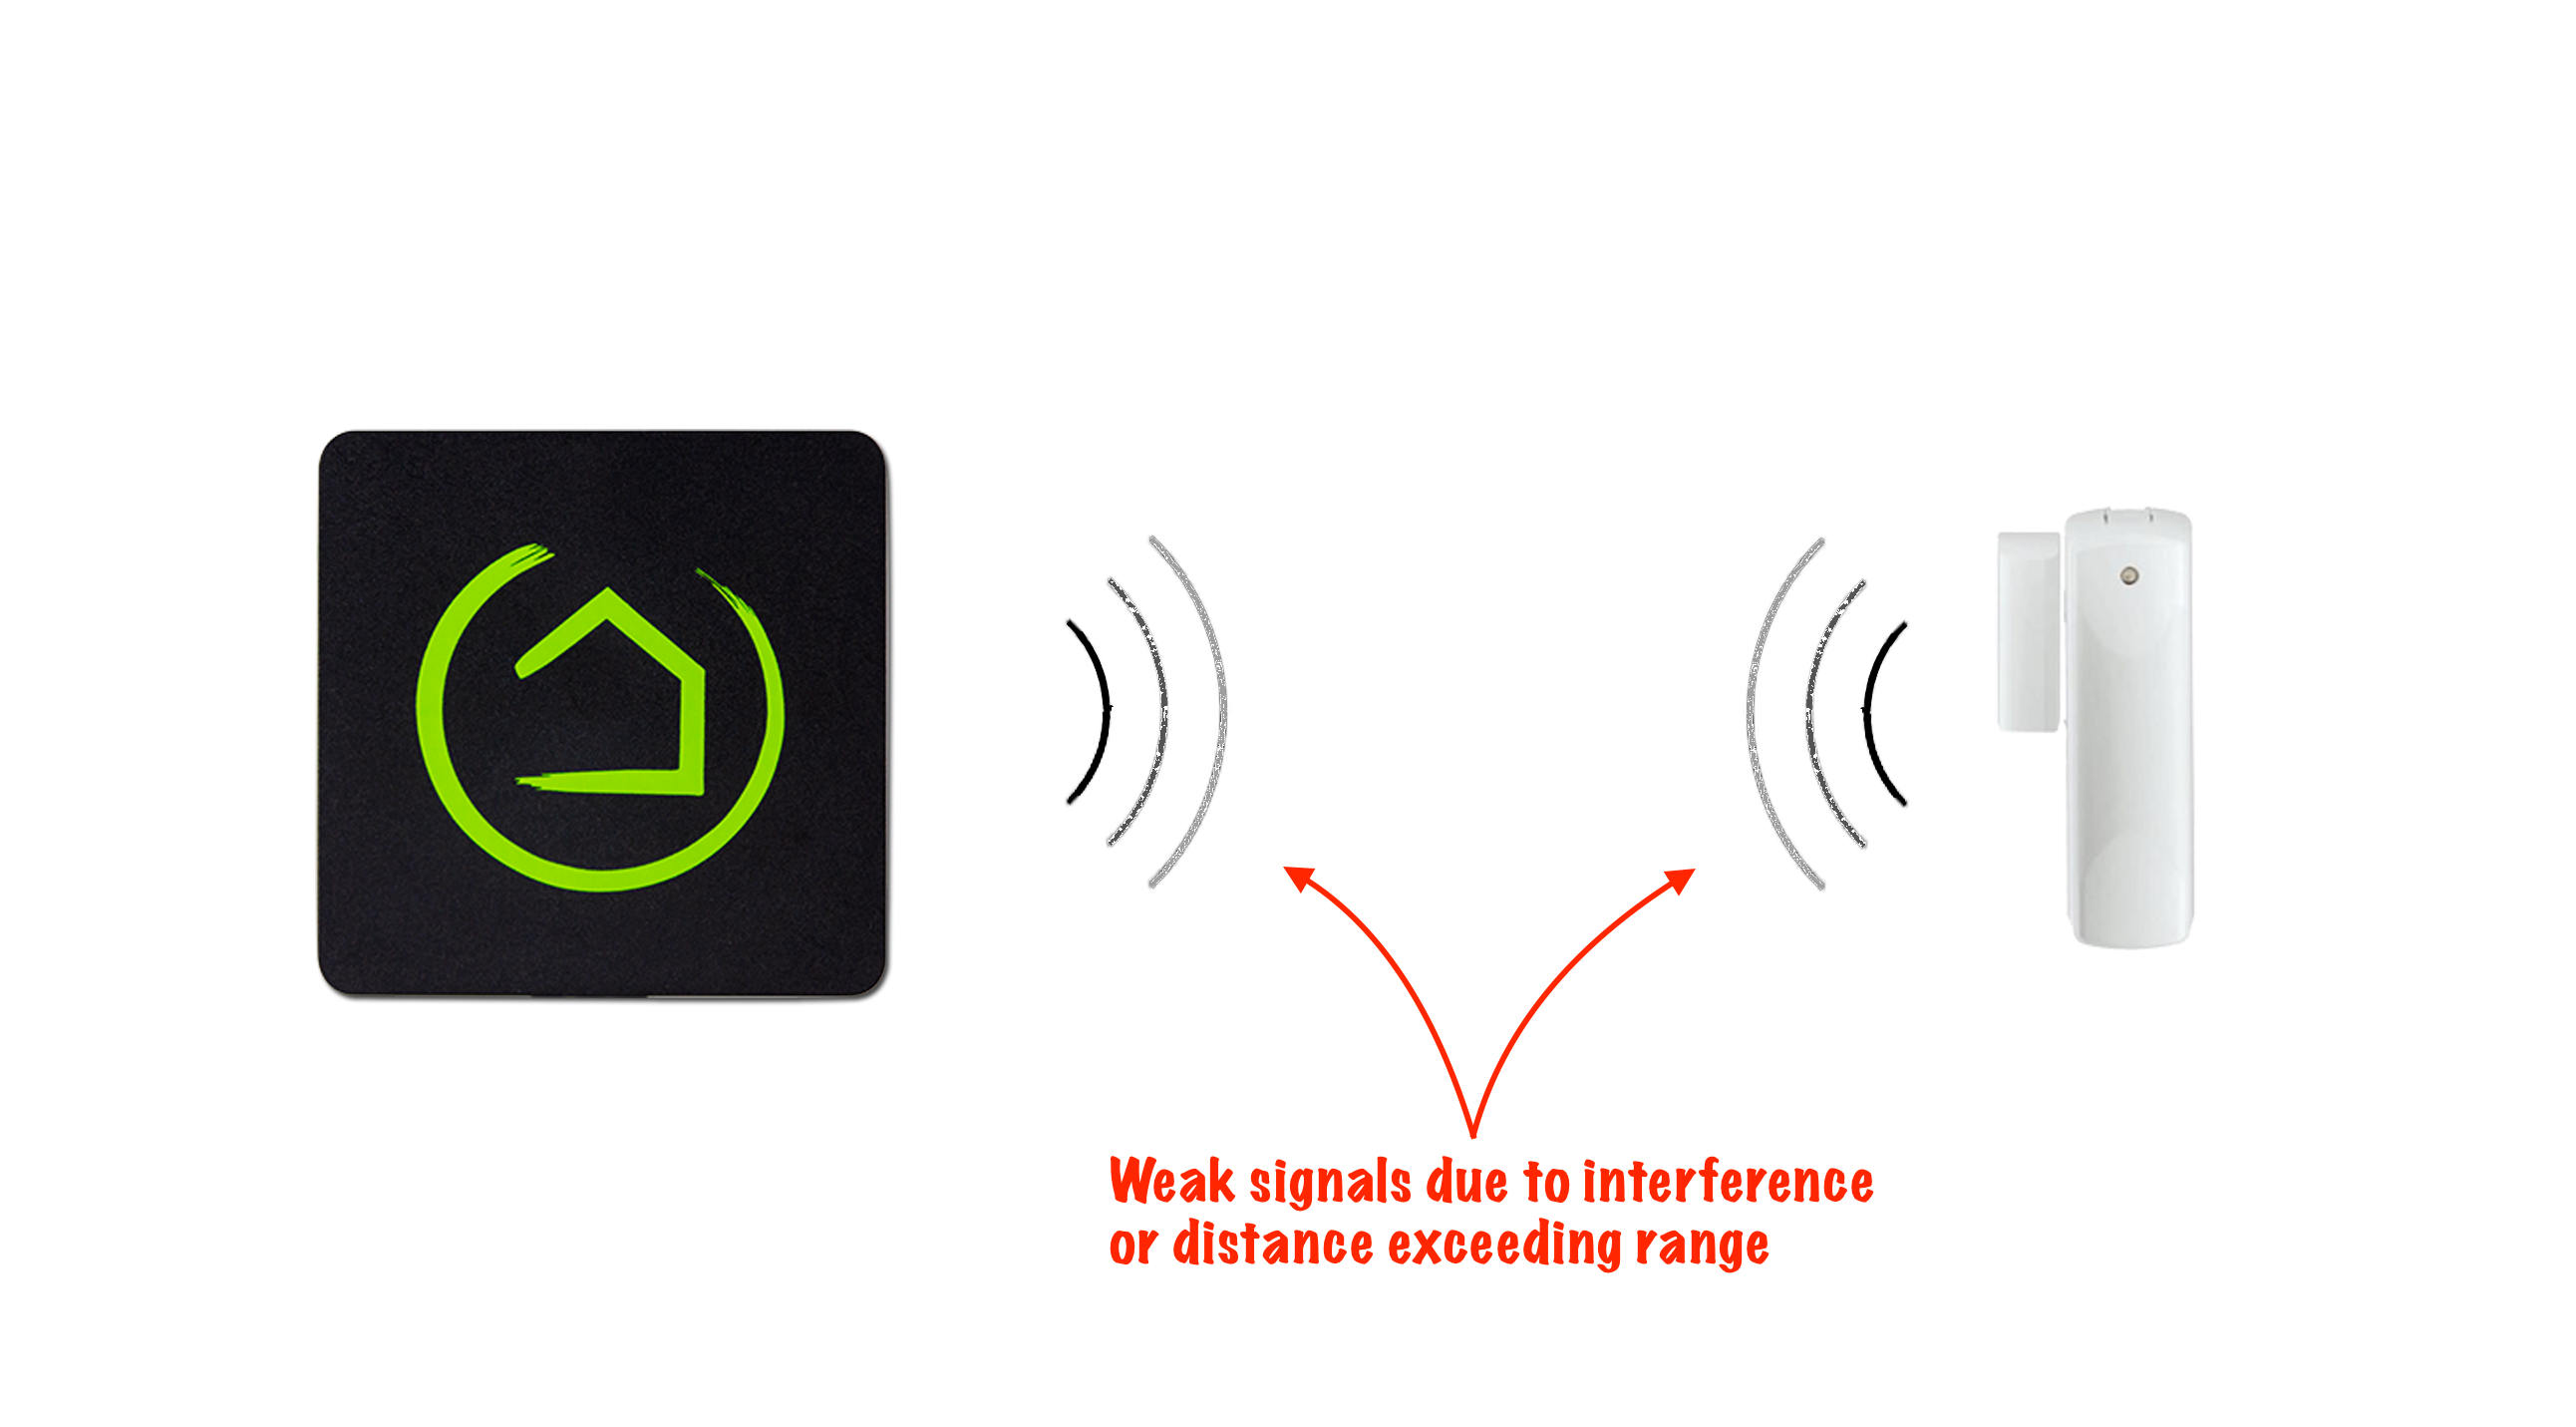 Z-Wave may have a weak signal due to interference or distance exceeding range